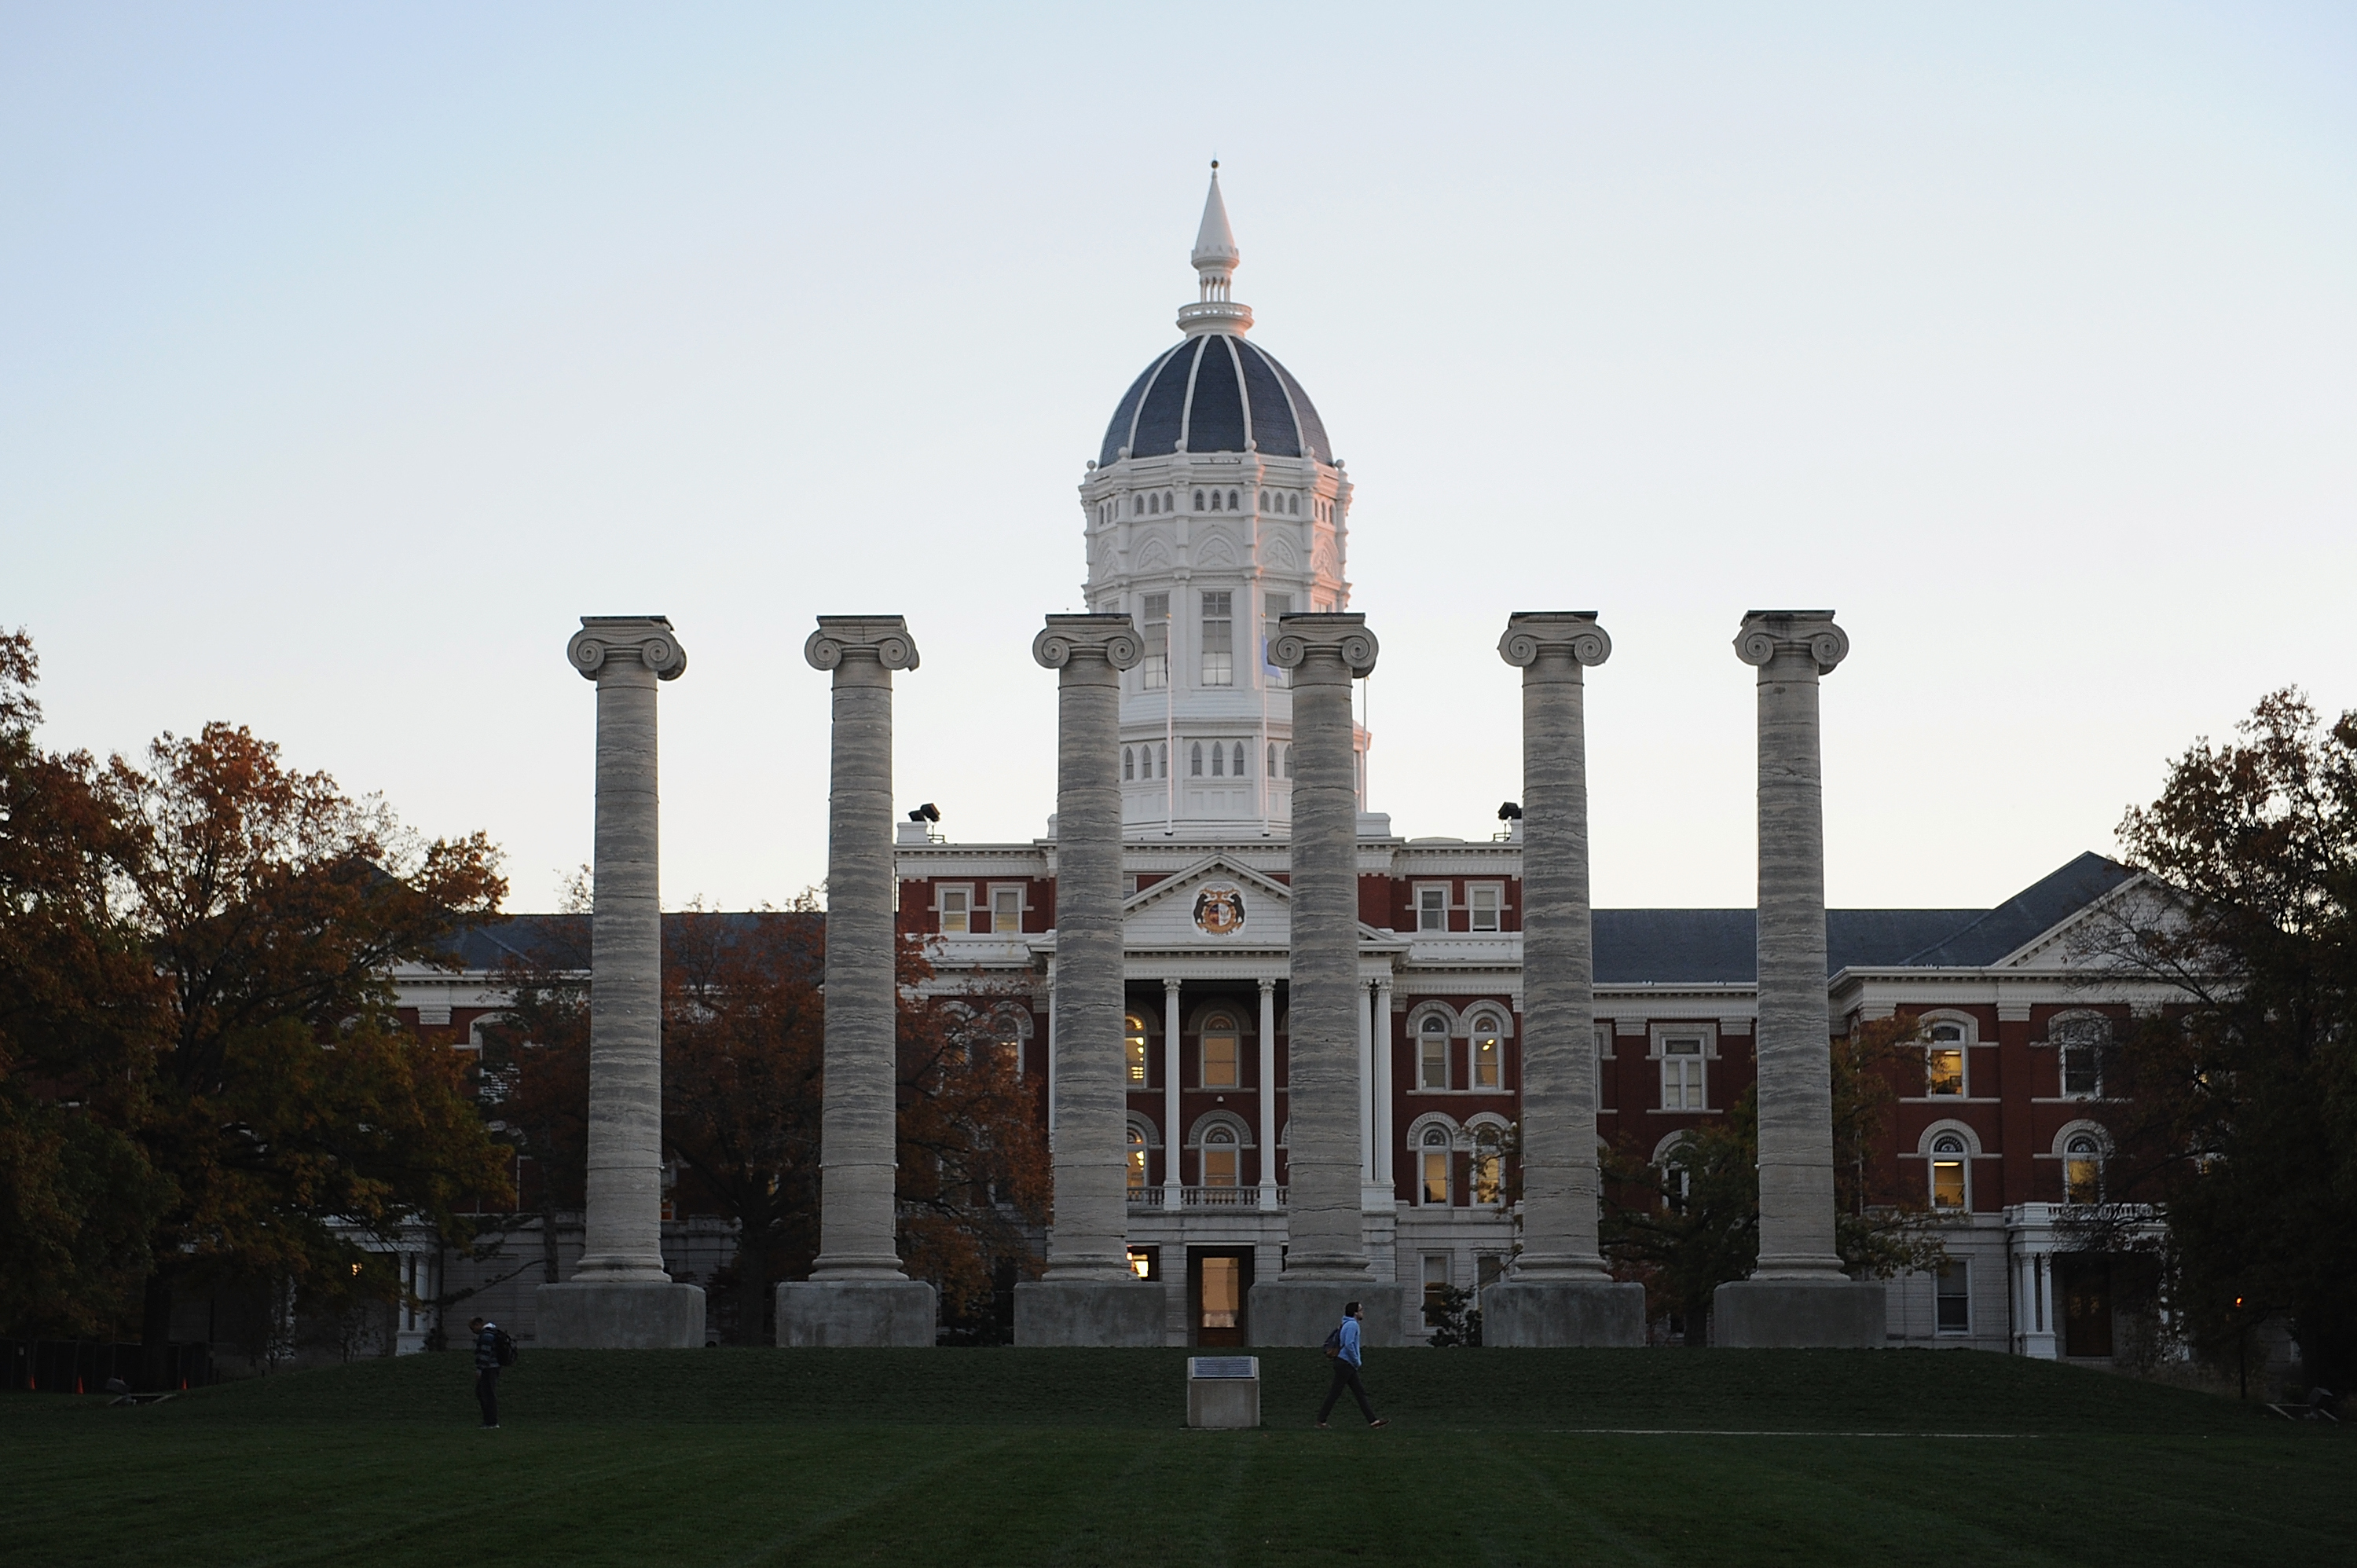 Students walk about on the campus of University of Missouri - Columbia on November 9, 2015 in Columbia, Missouri. (Michael B. Thomas&mdash;Getty Images)